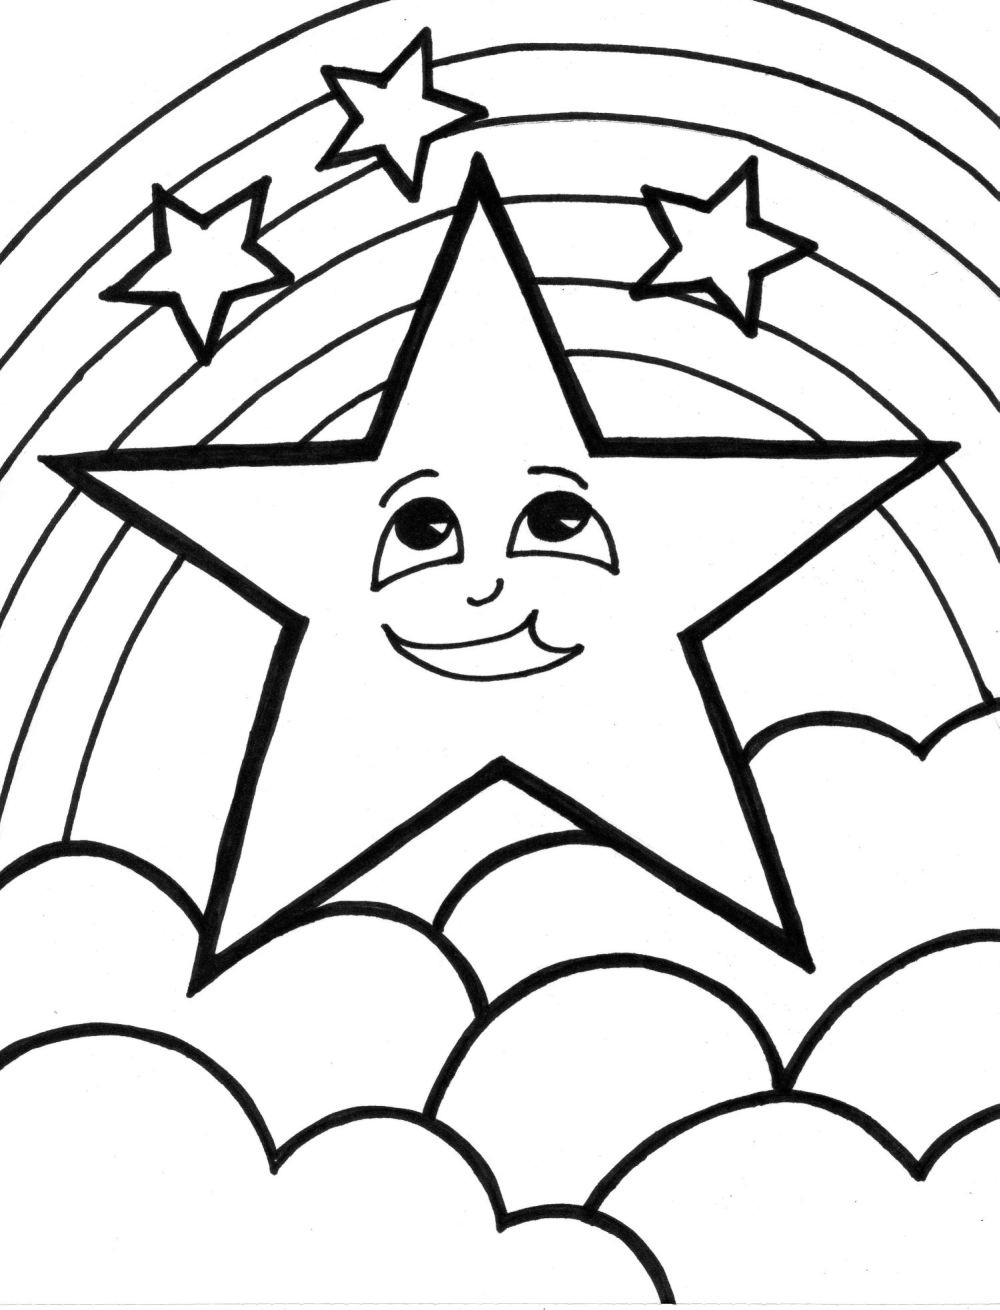  Star Coloring Pages Cute For Kids